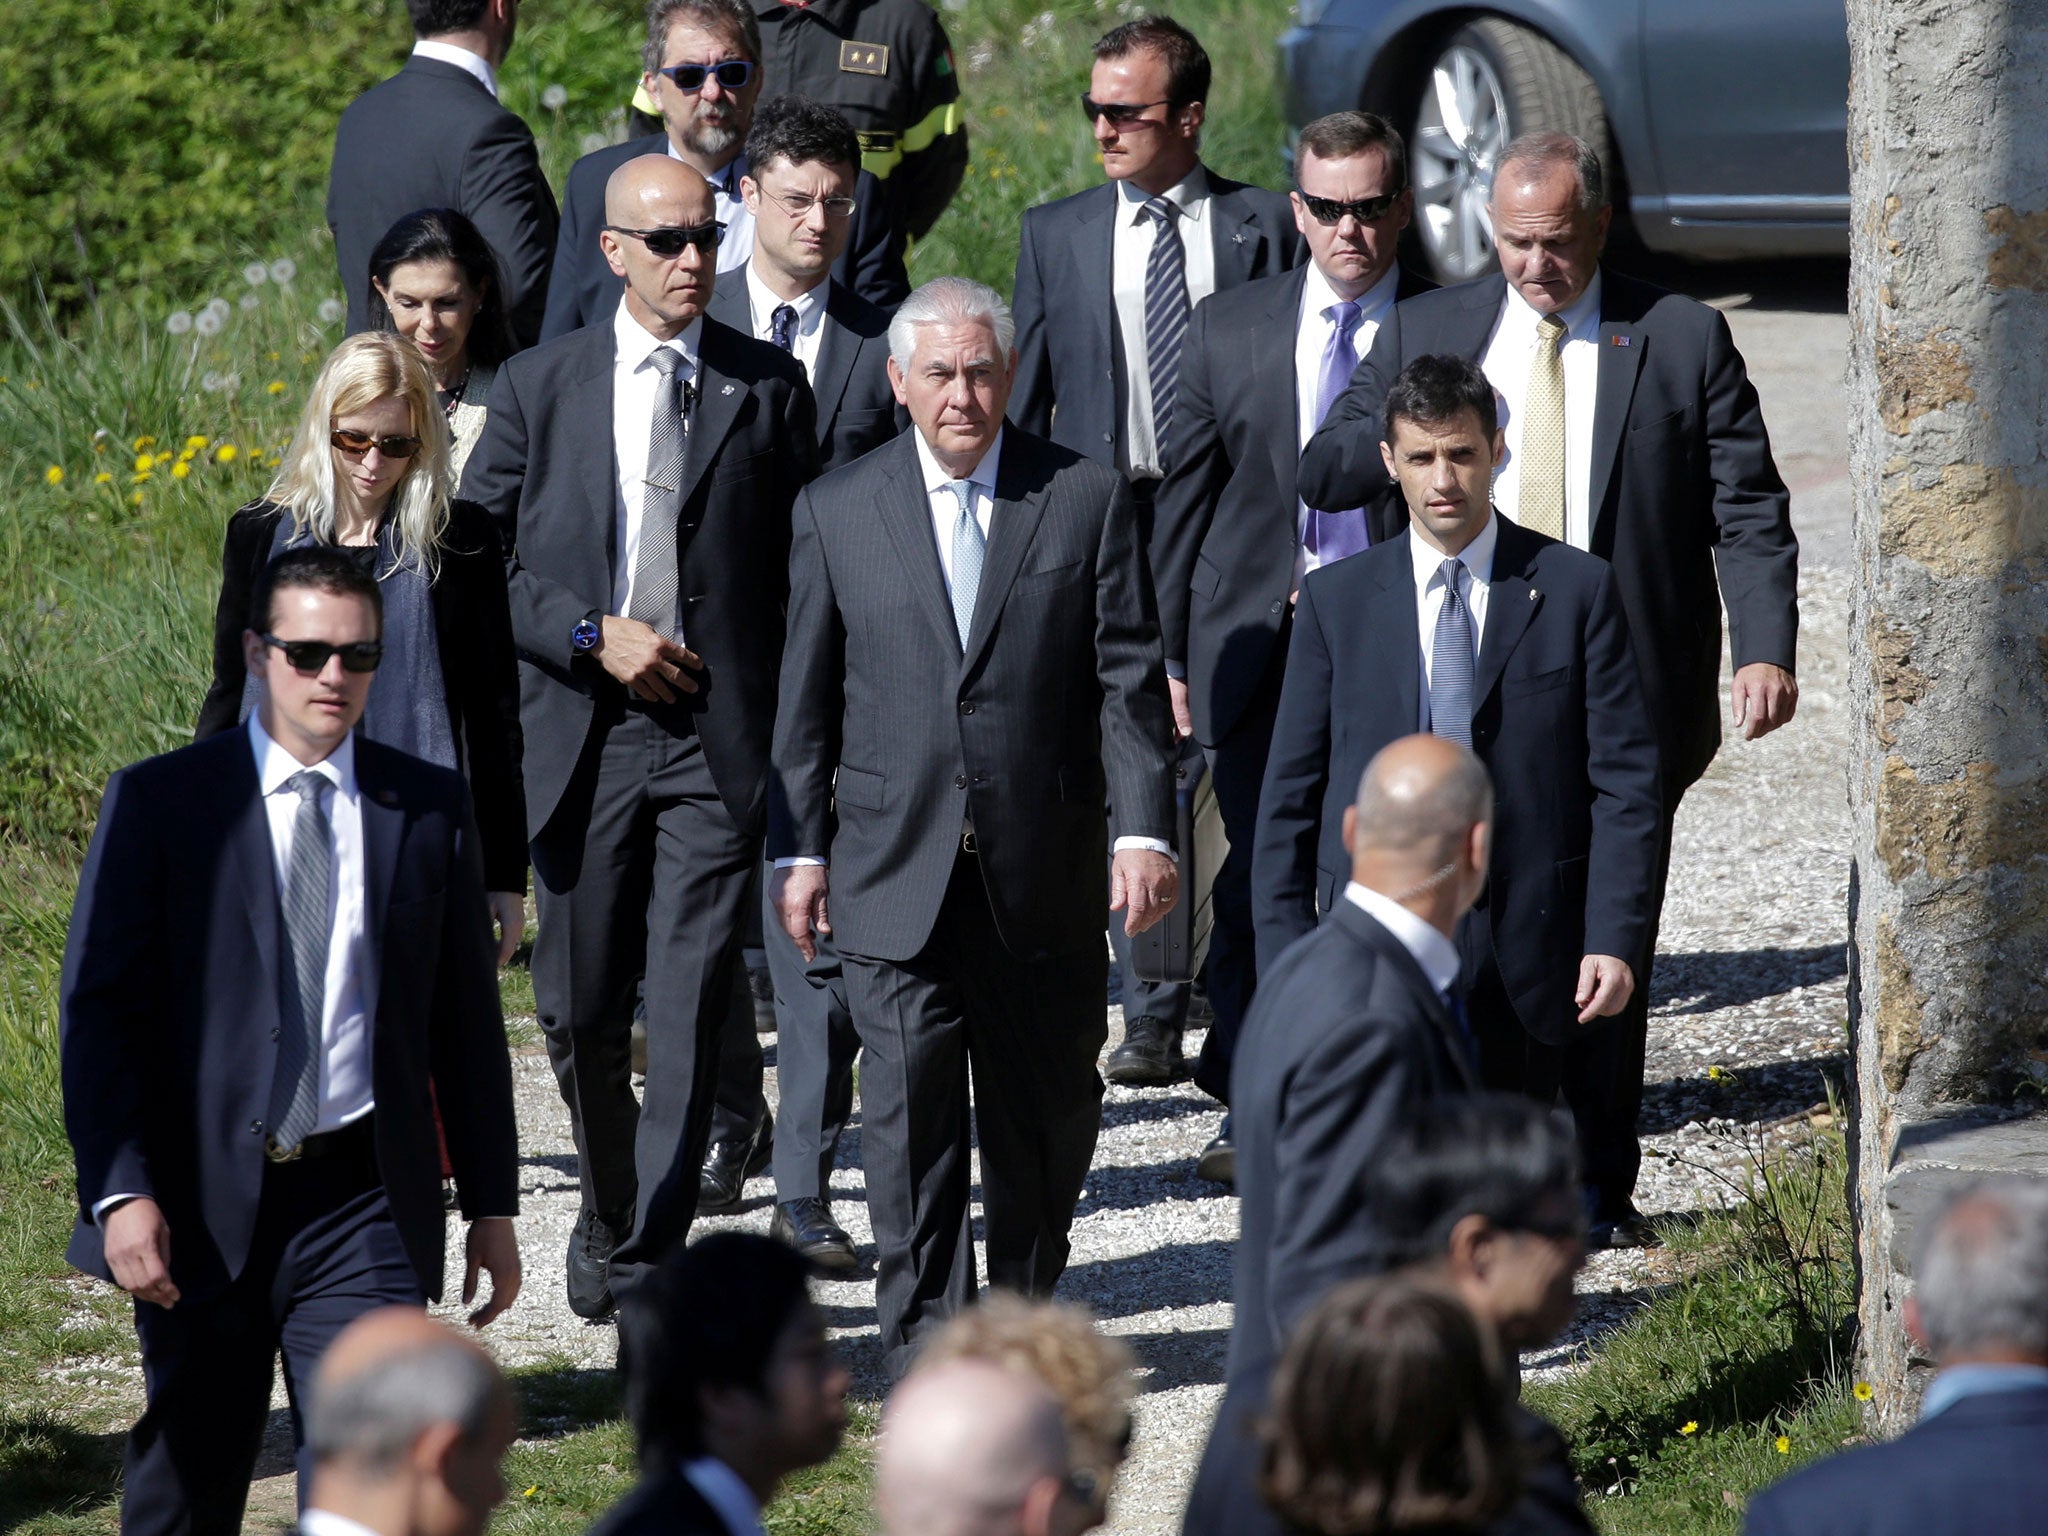 &#13;
US Secretary of State Rex Tillerson arrives to attend a ceremony at the Sant'Anna di Stazzema memorial &#13;